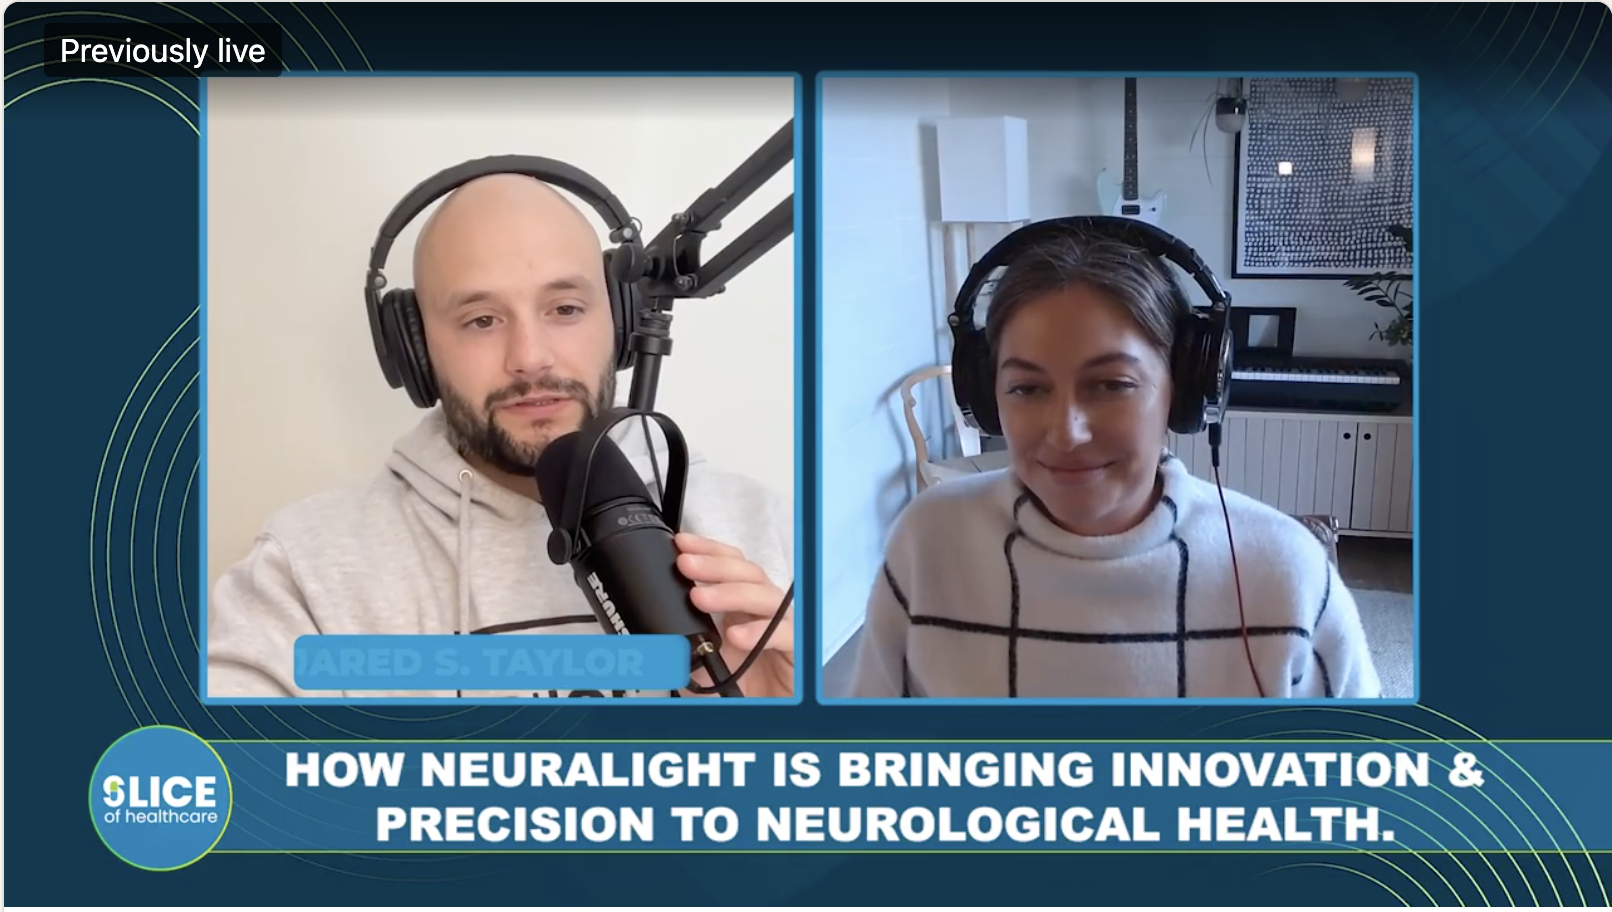 Listen to NeuraLight’s Chief Commercial Officer on the Slice Of Healthcare Podcast